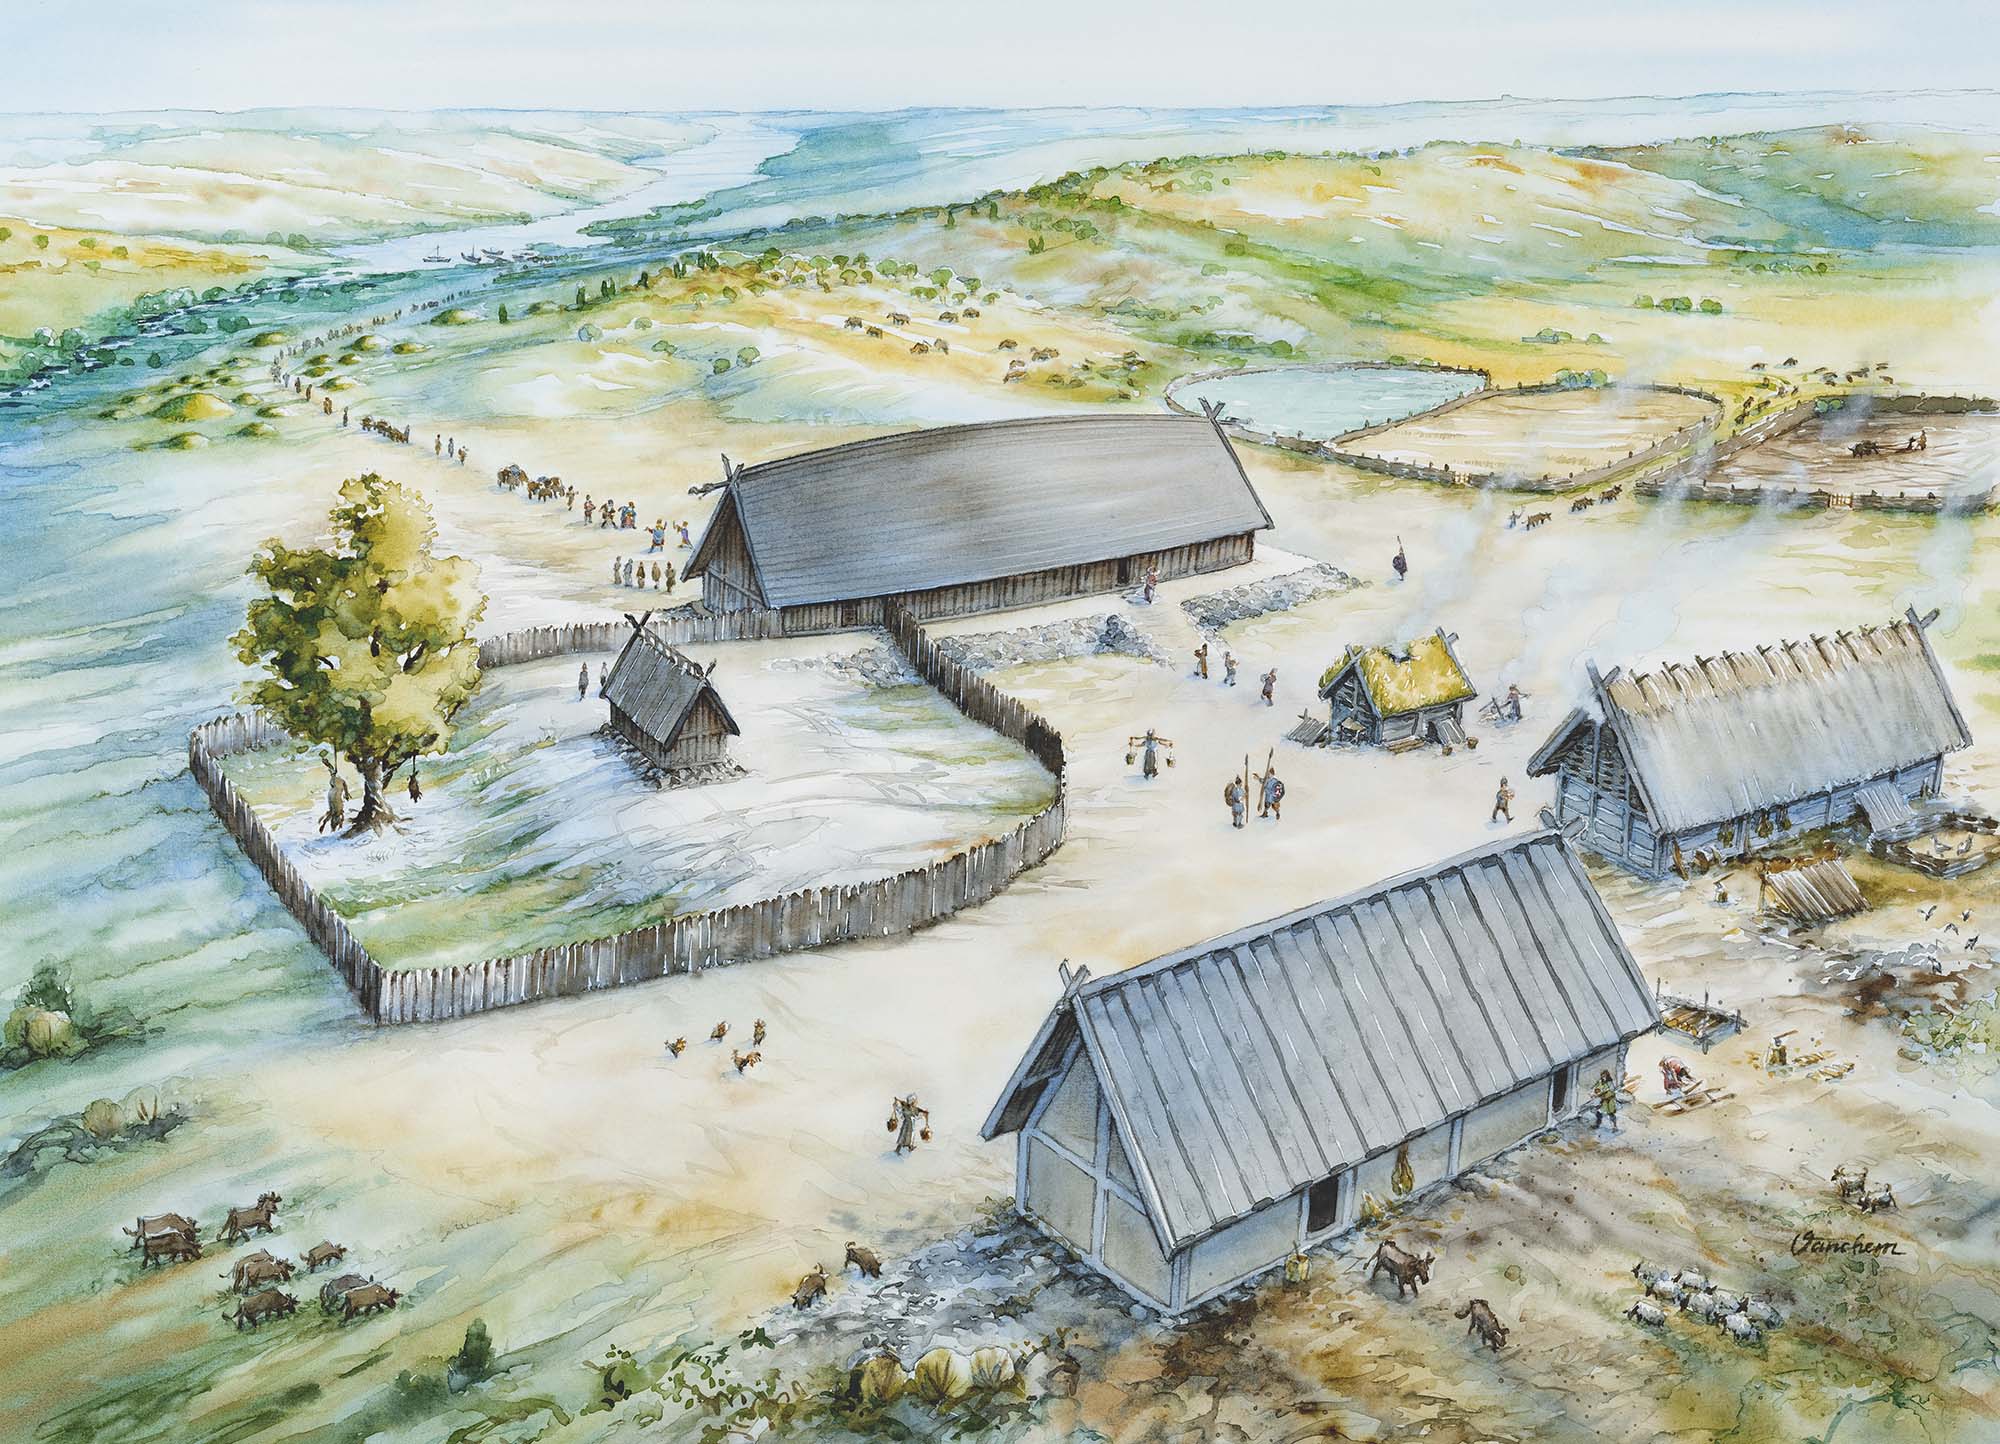 Sätuna manor during the late Viking Age (Client: Sigtuna Museum)